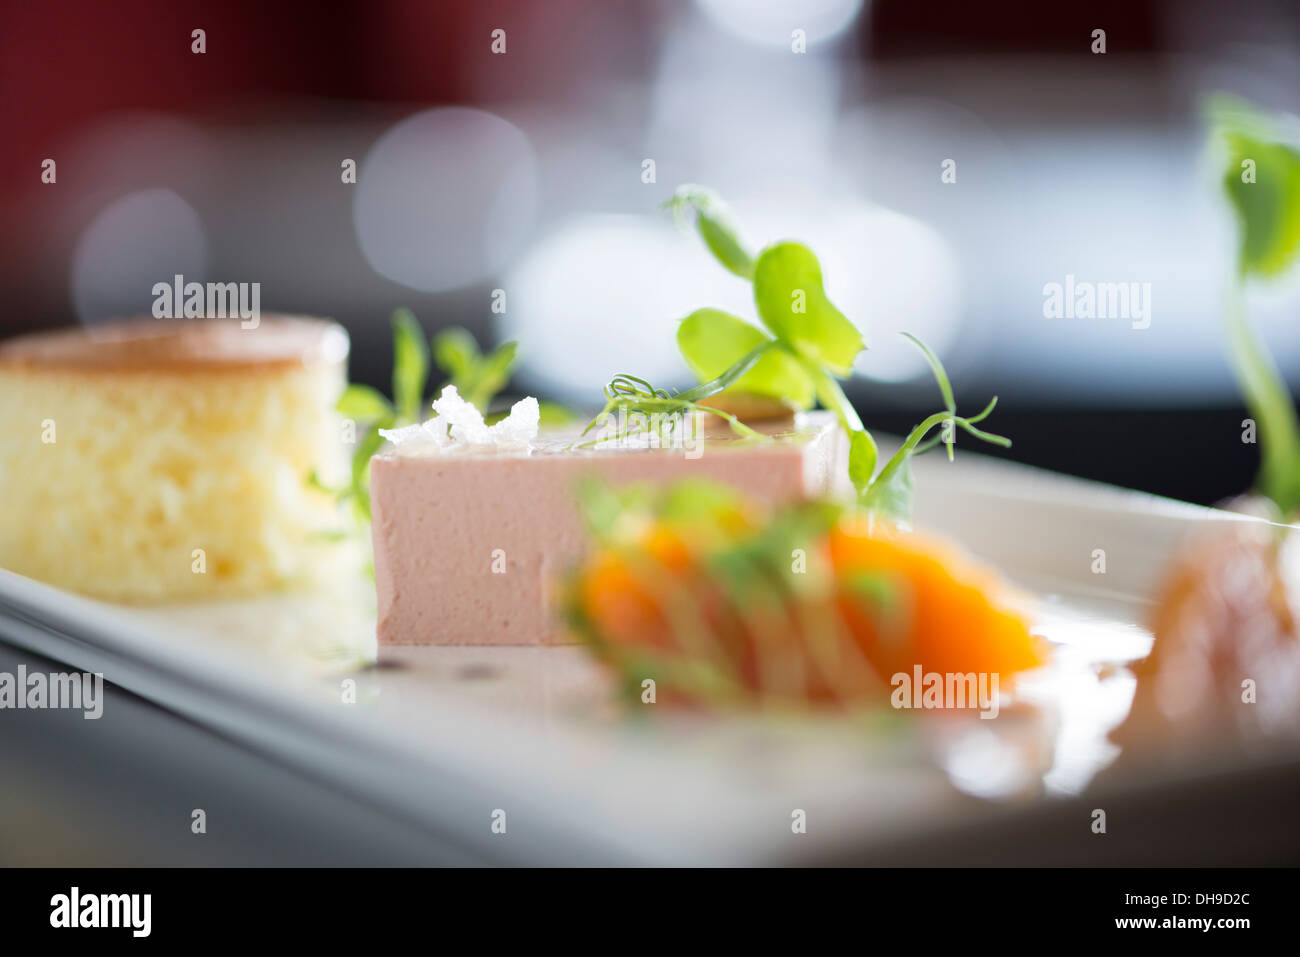 Pate, brioche and marmalade food from a fine dining restaurant Stock Photo